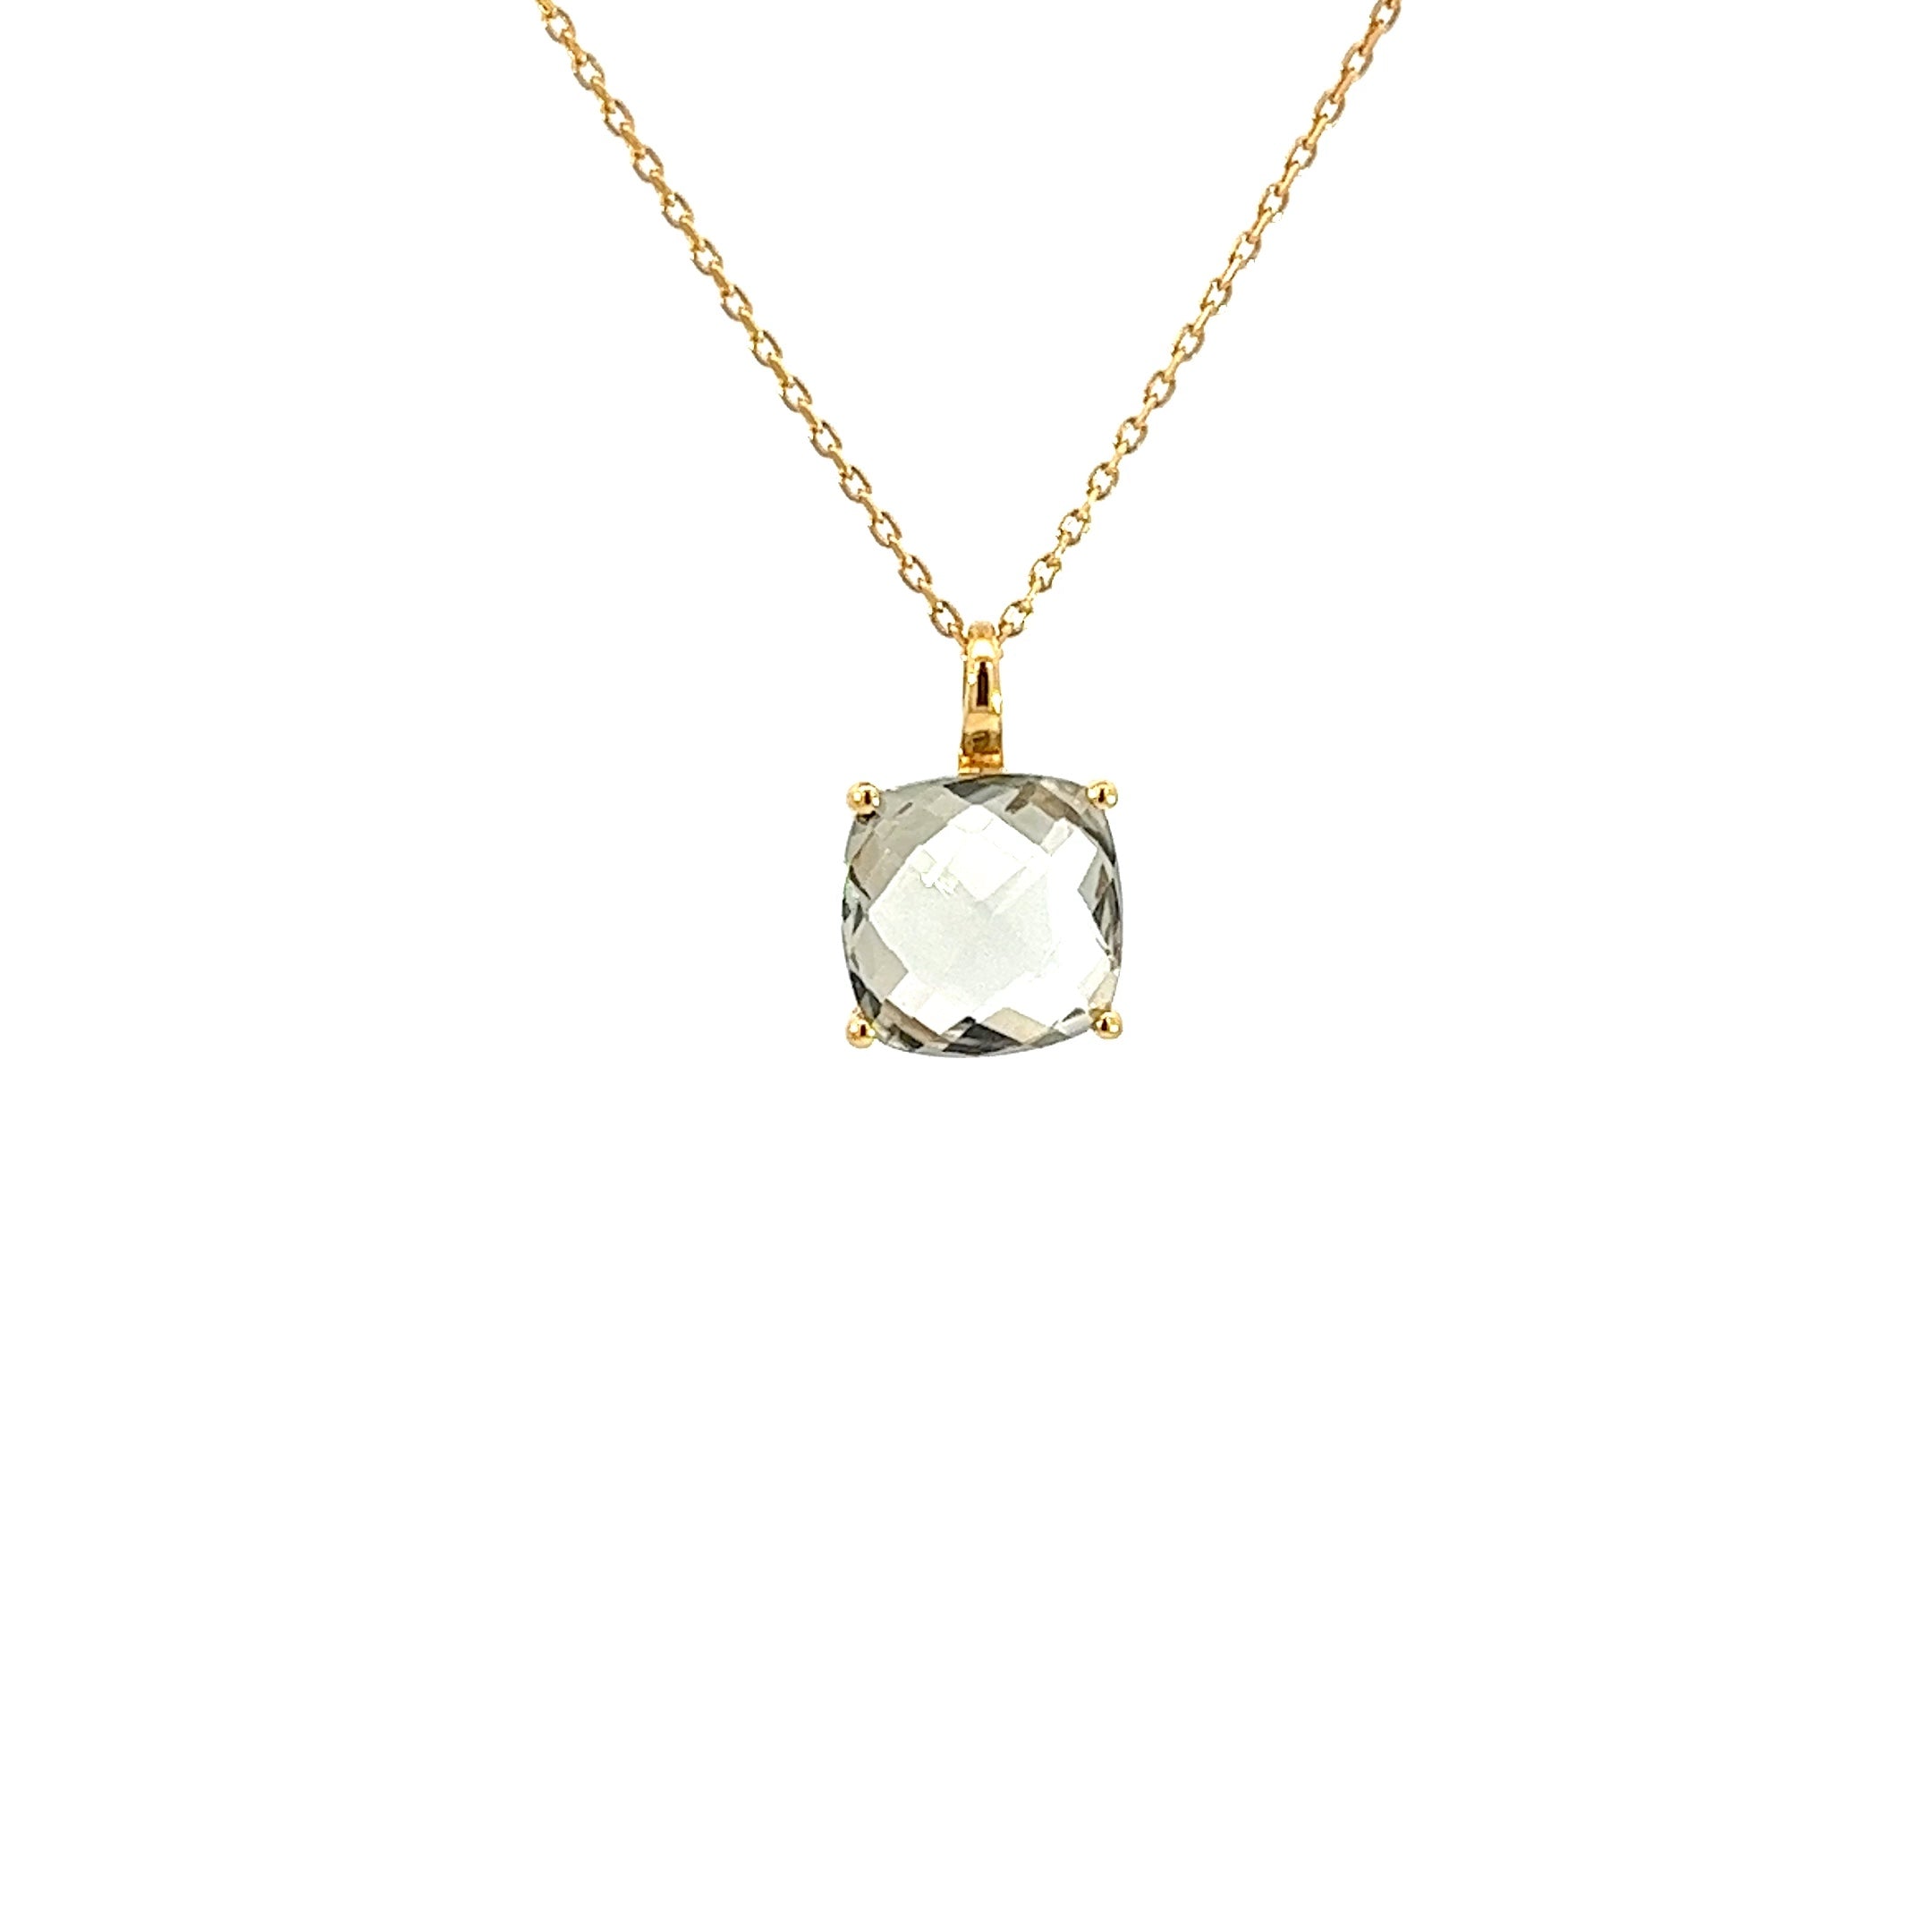 GREEN AMETHYST PENDANT SET IN 925 SILVER GOLD PLATED